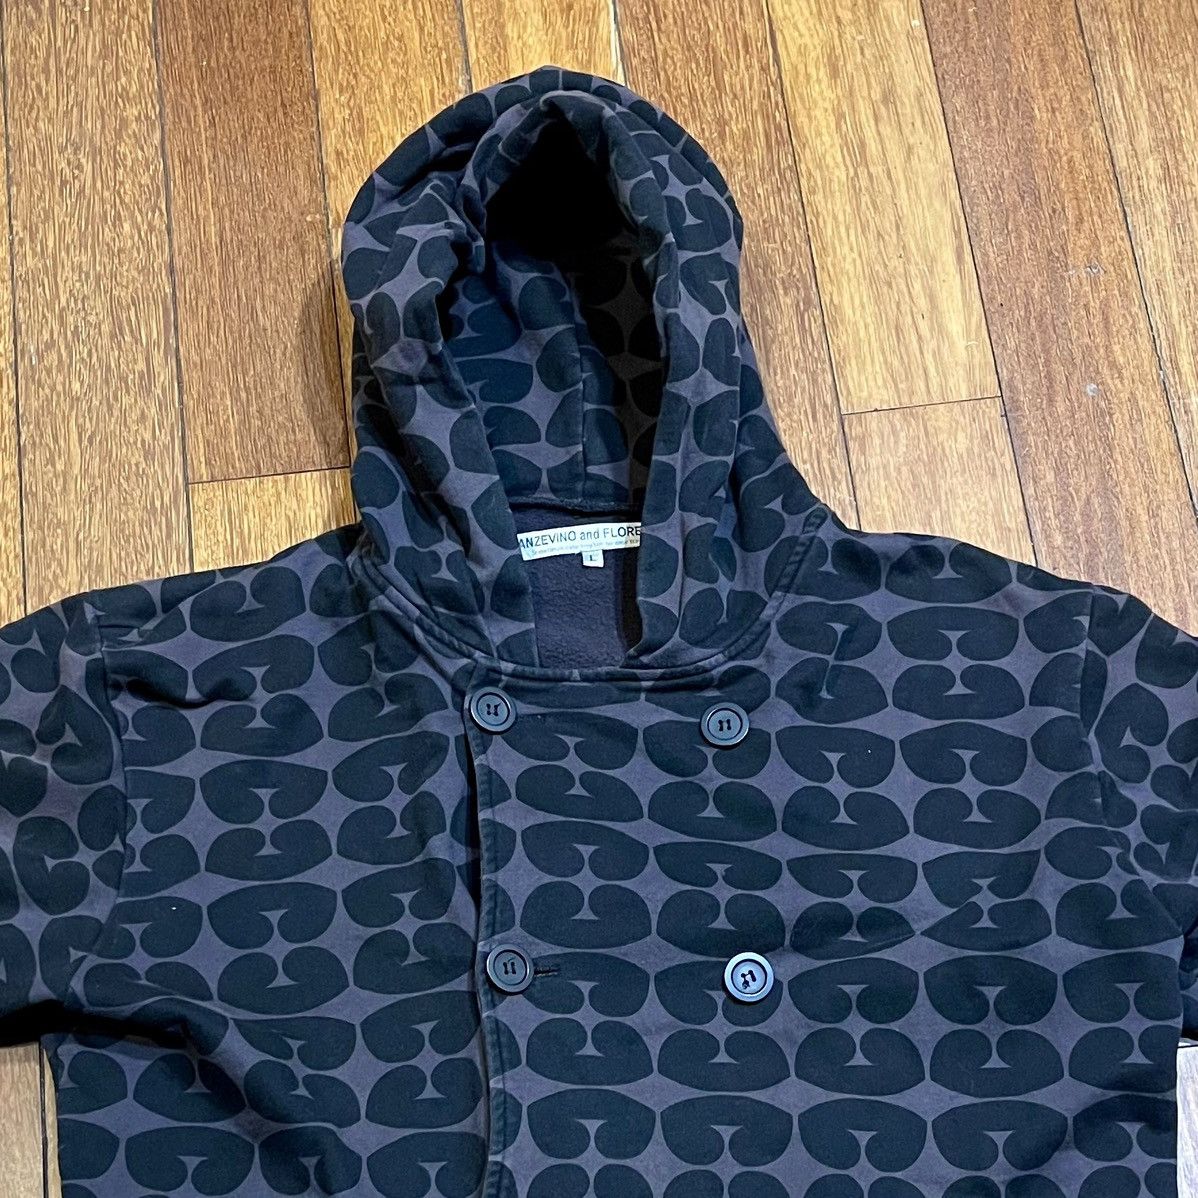 Vintage BLACK AND DARK BURGUNDY ANZEVINO AND FLORENCE HOODIE! Size US L / EU 52-54 / 3 - 3 Thumbnail